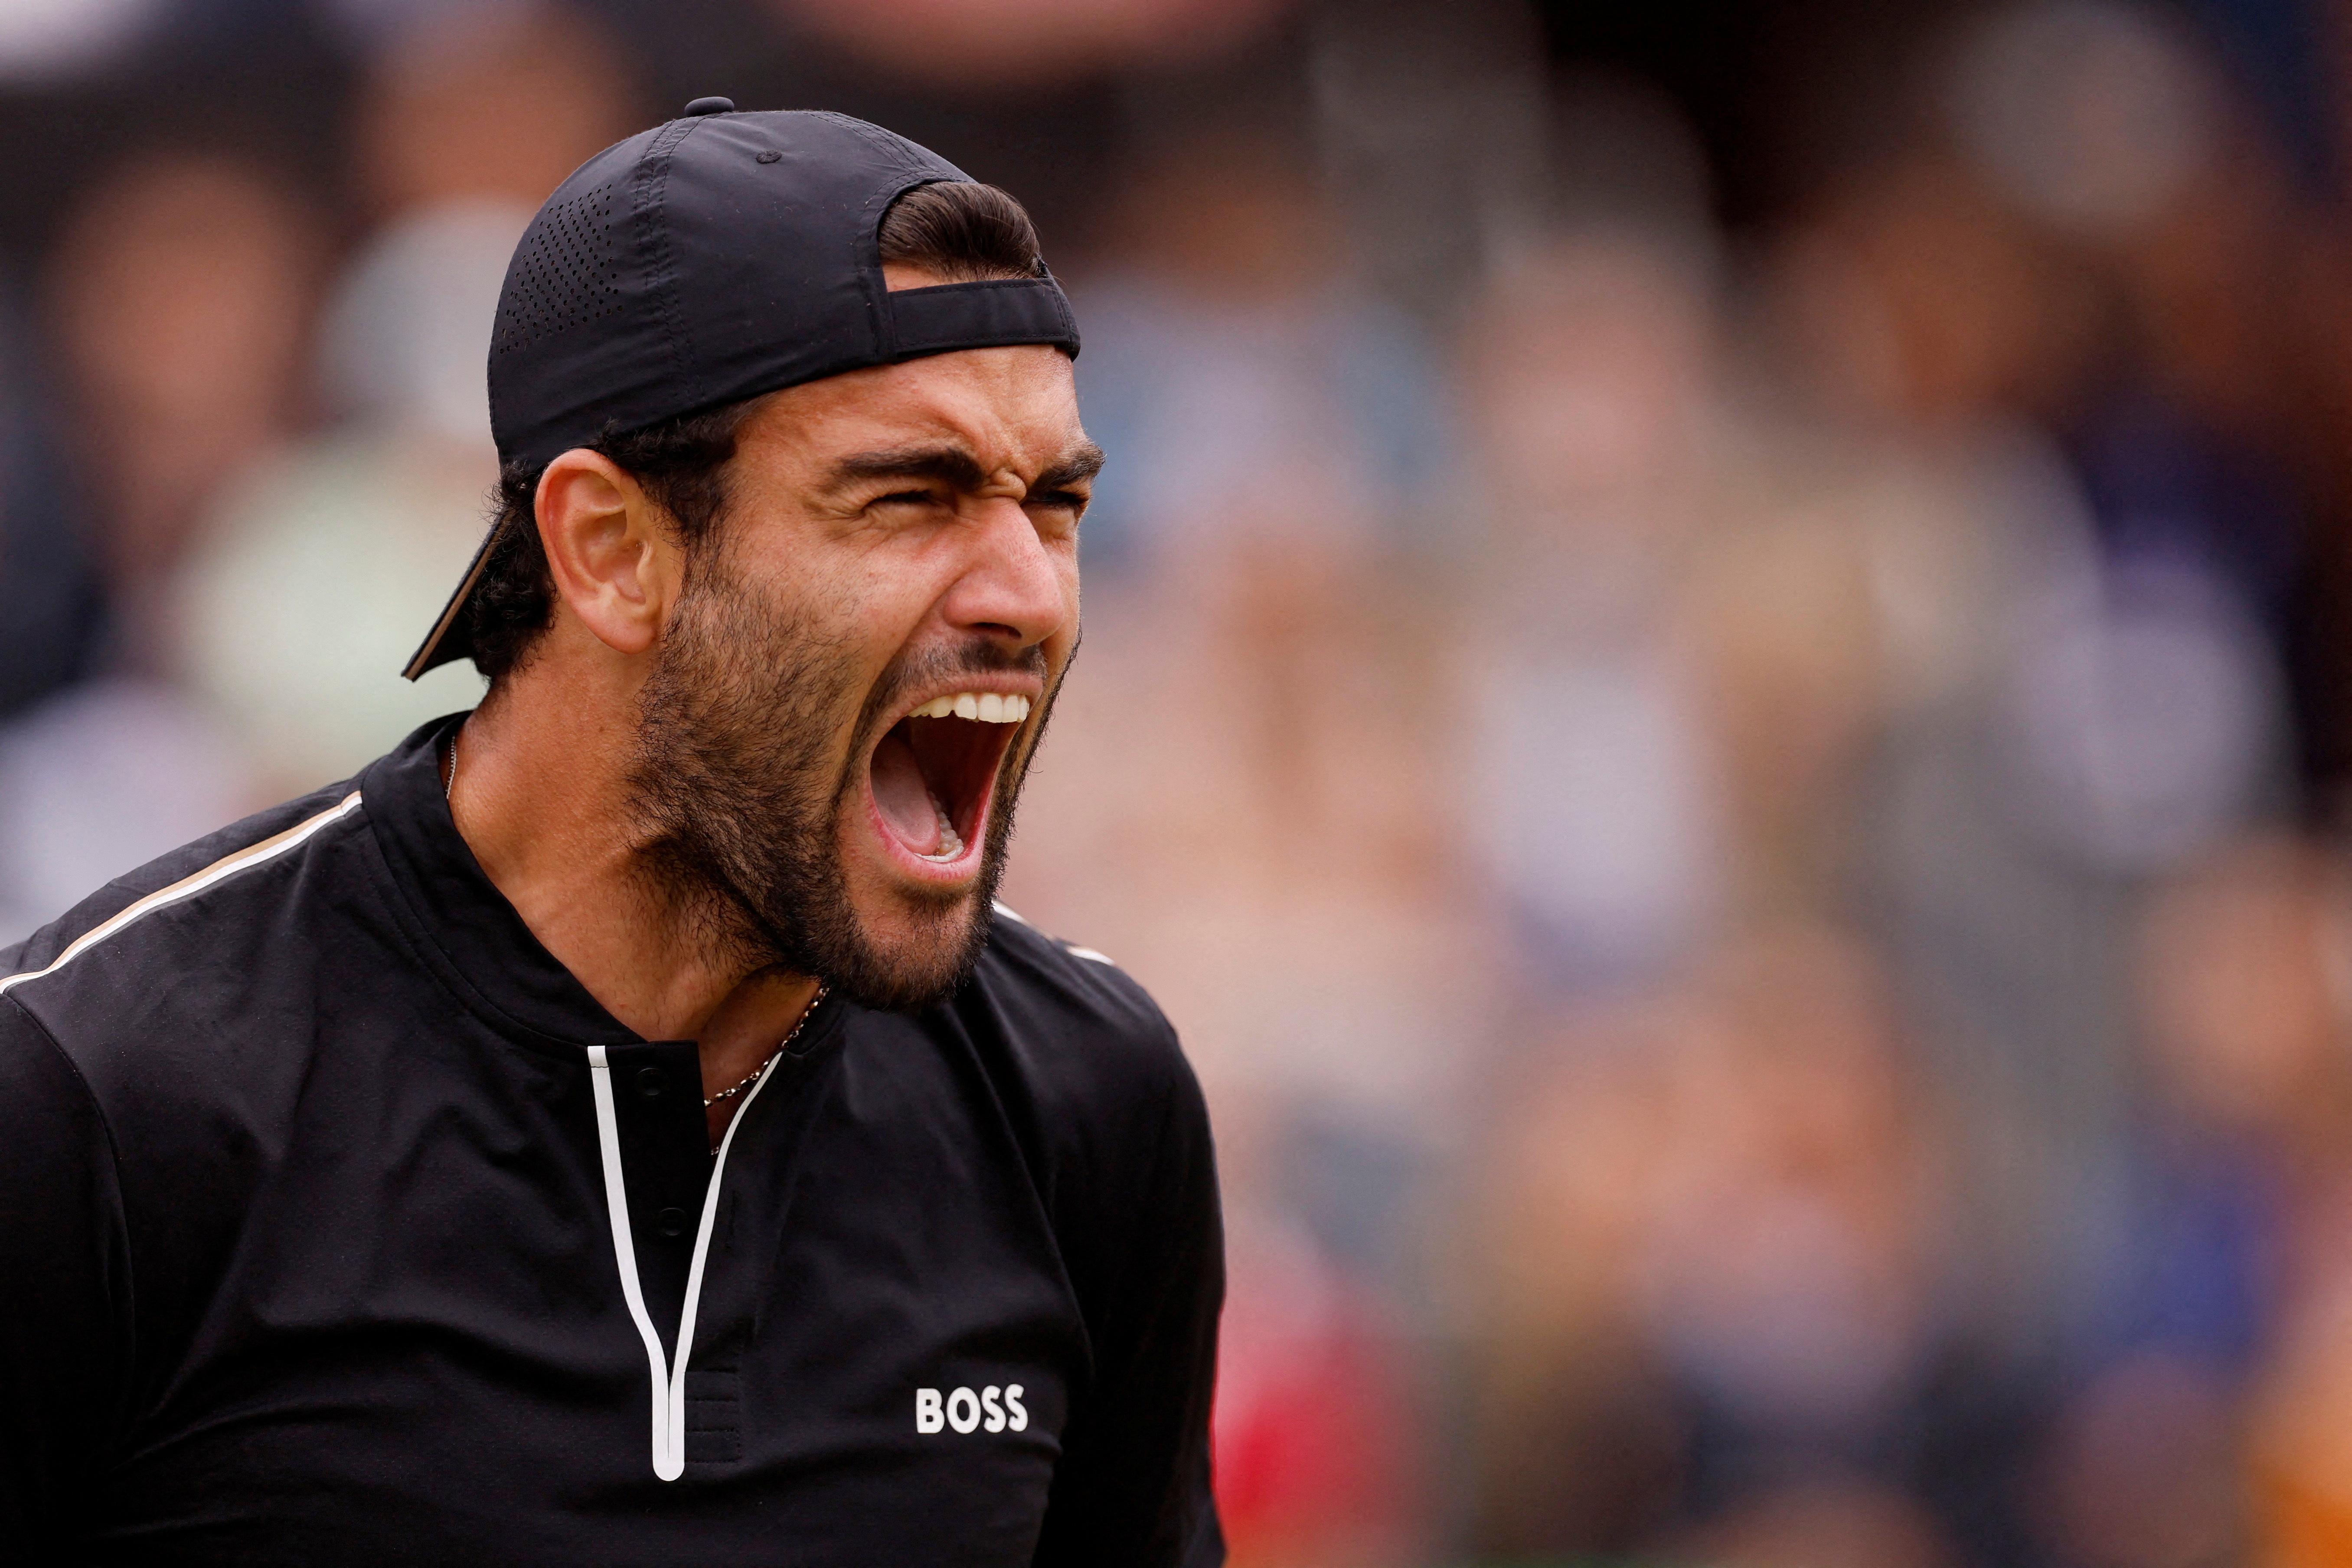 Berrettini and Čilić forced to remove themselves from Wimbledon following positive COVID-19 tests